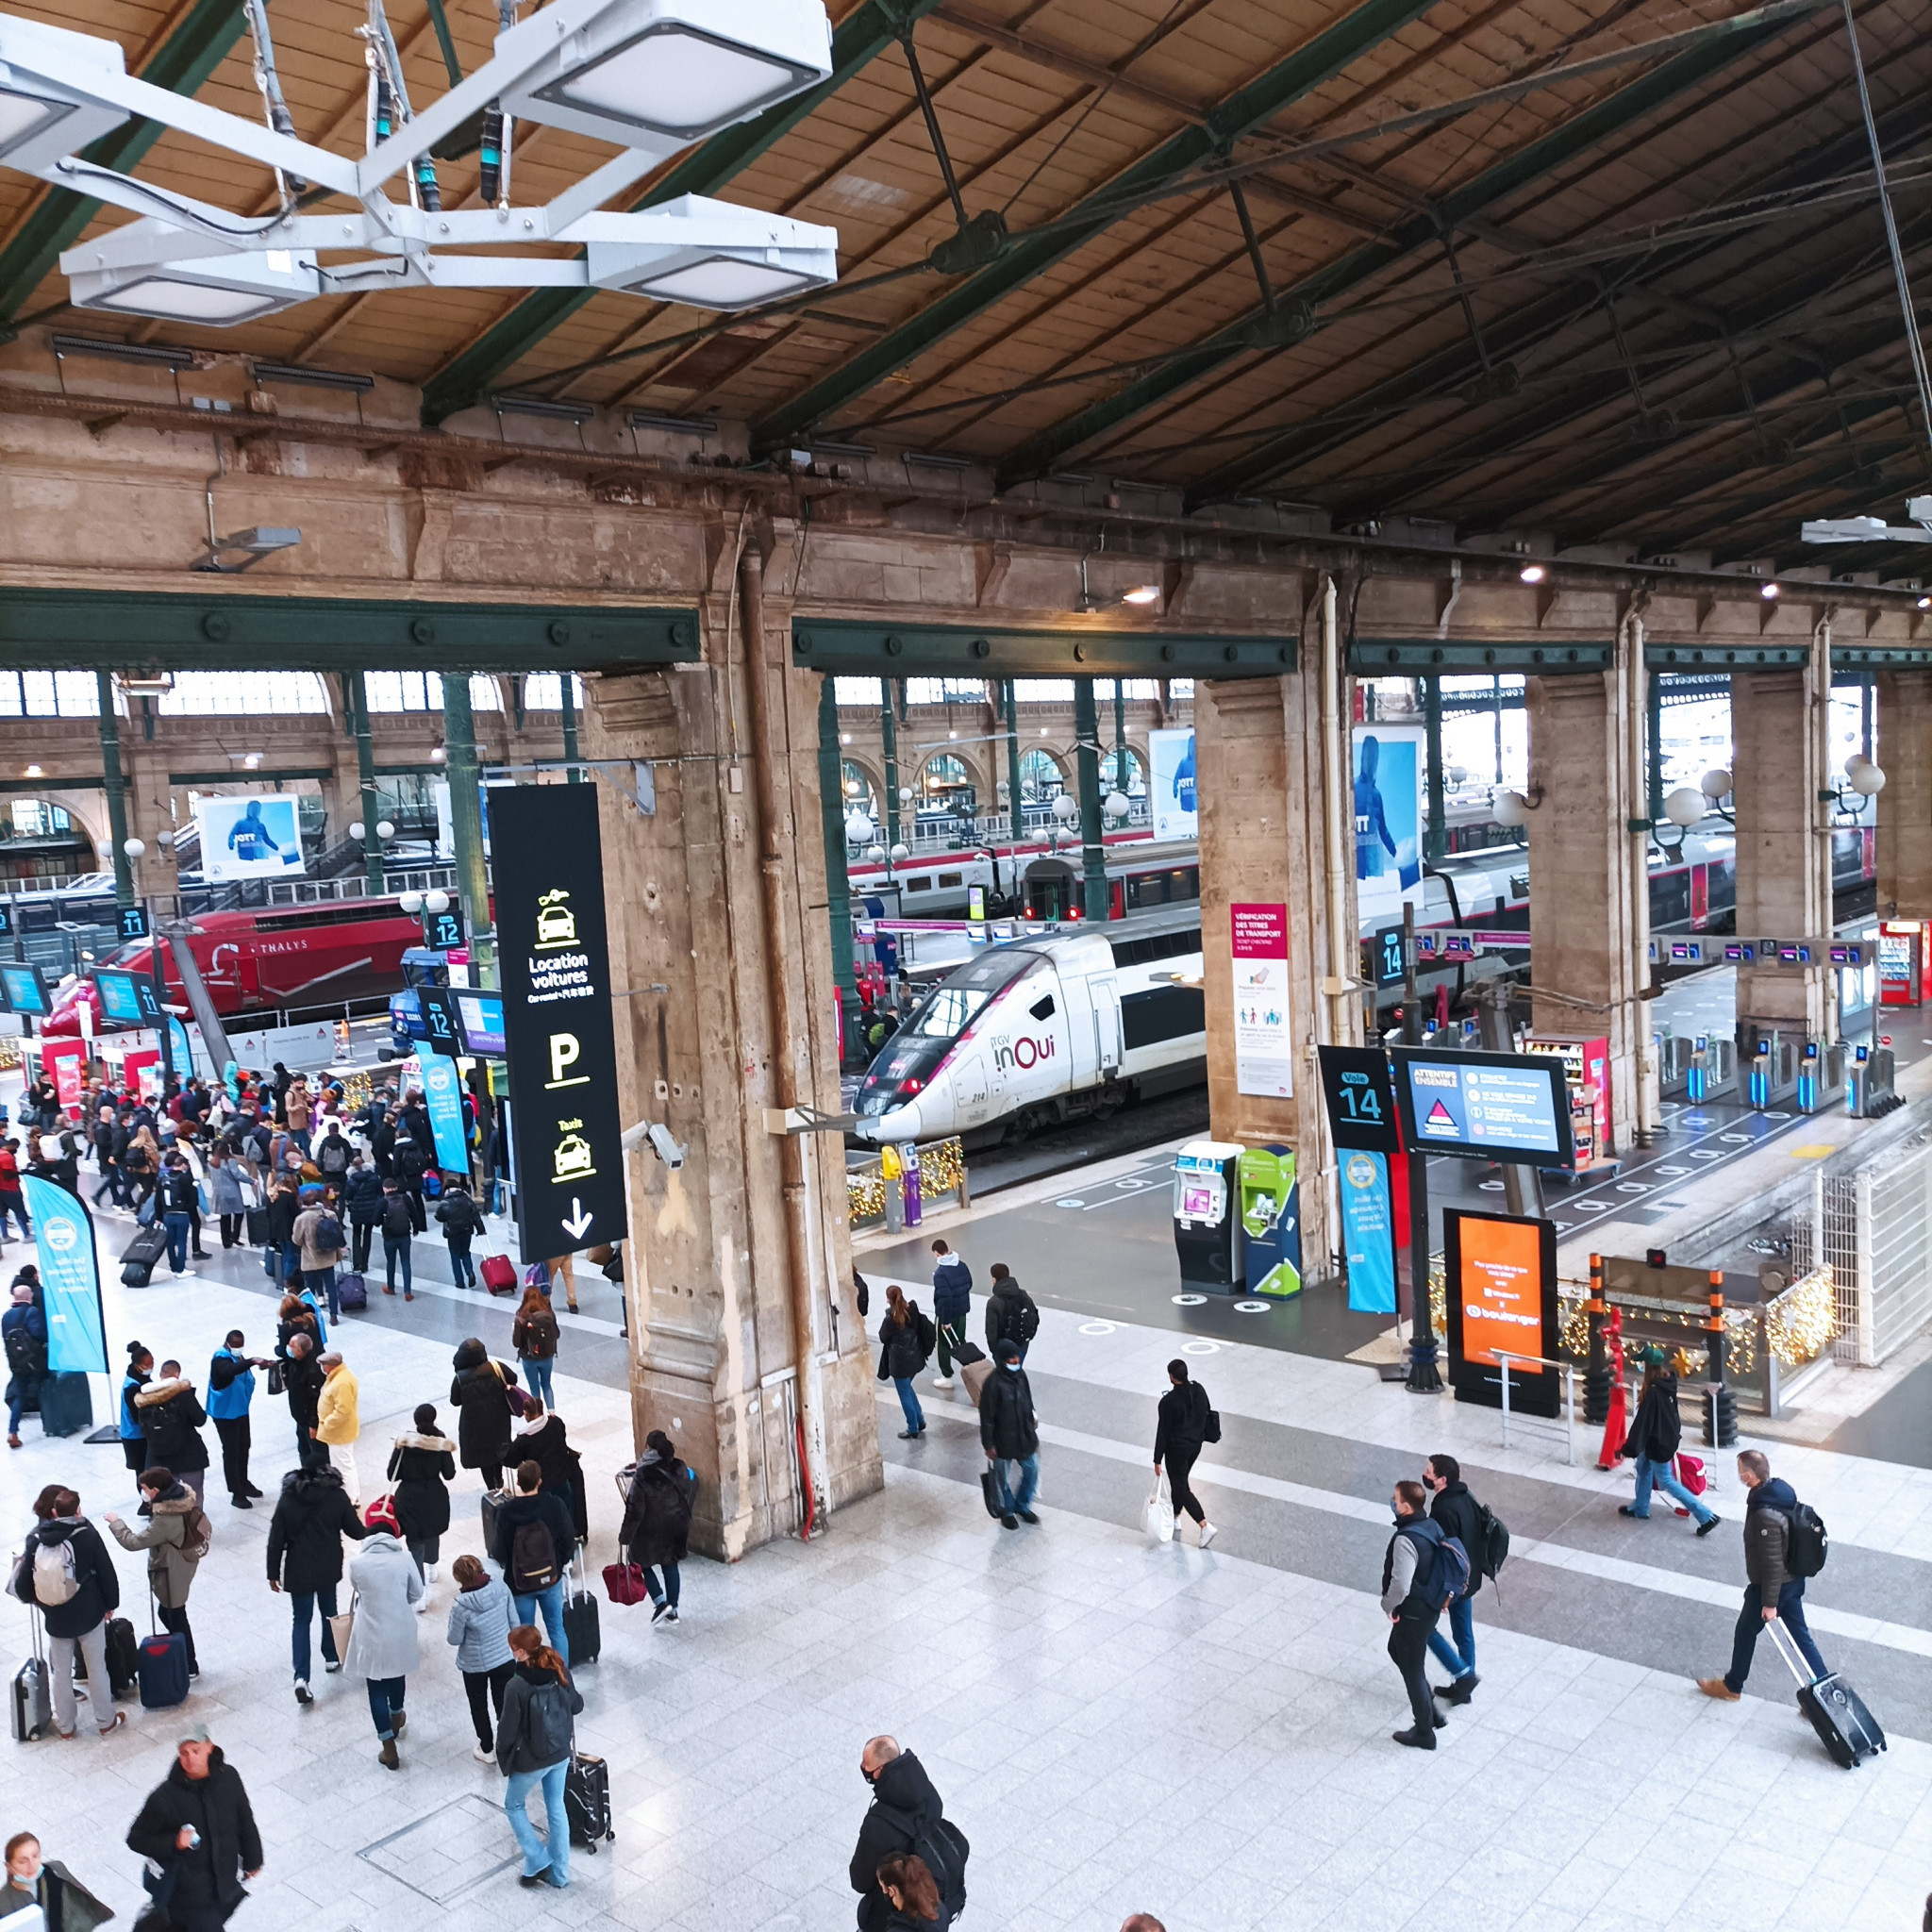 The Gare du Nord is to undergo a €55 million makeover before the Olympics ©ITG 